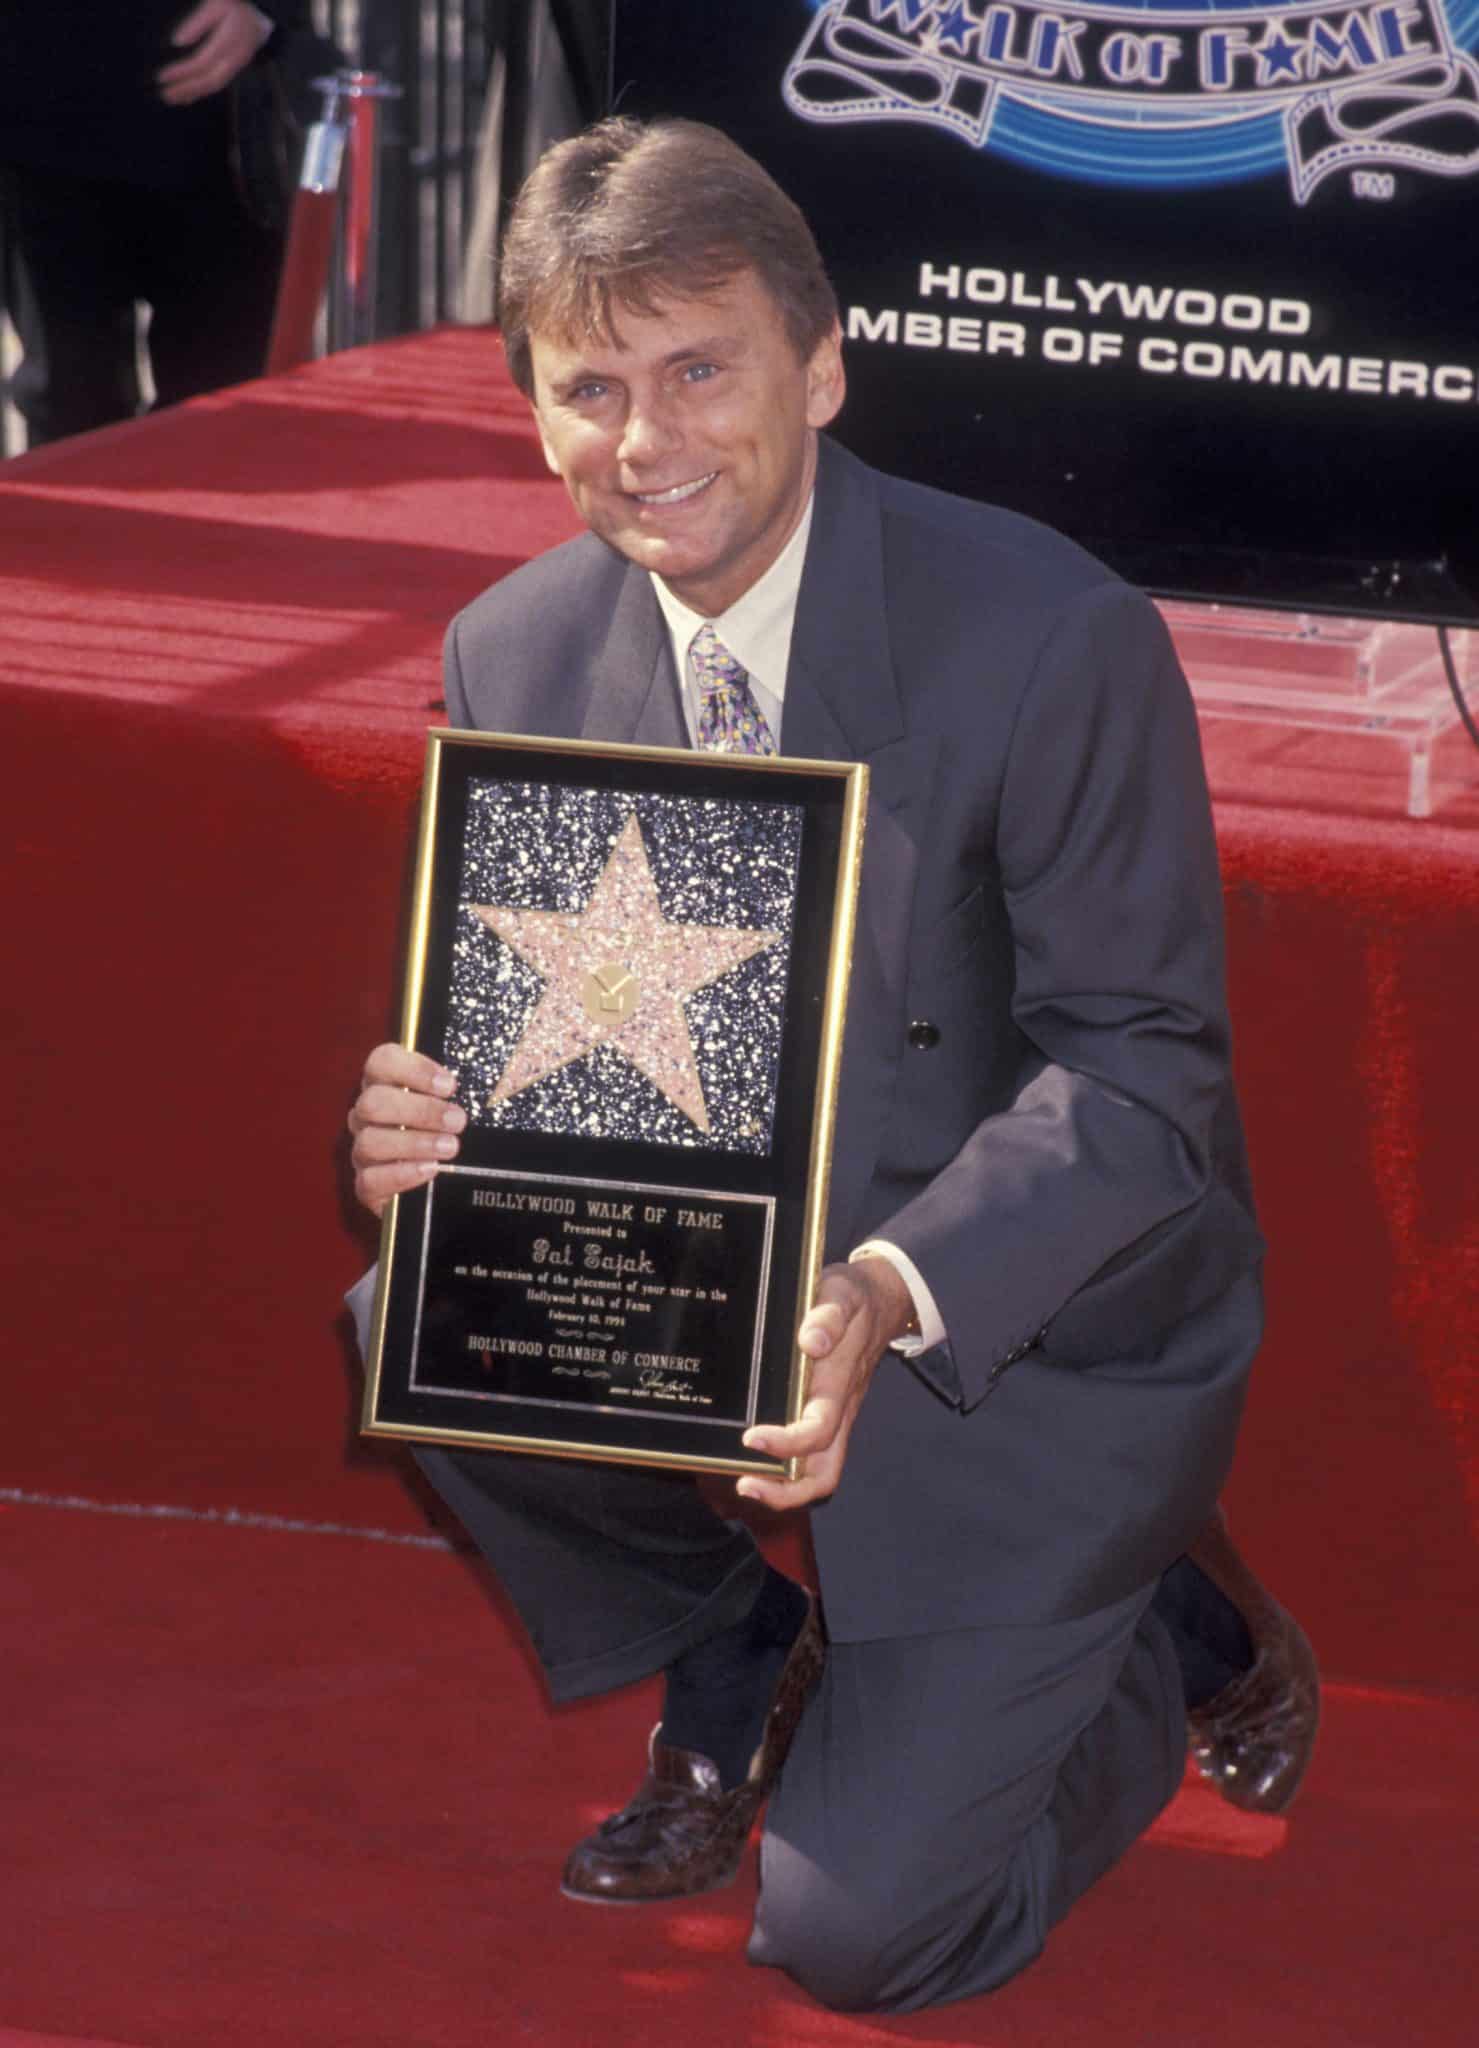 Game Show Host Pat Sajak attending 'Pat Sajak Receives Walk of Fame Star' on February 10, 1994 at the Hollywood Walk of Fame in Hollywood, California. (Photo by Ron Galella, Ltd./Ron Galella Collection via Getty Images)